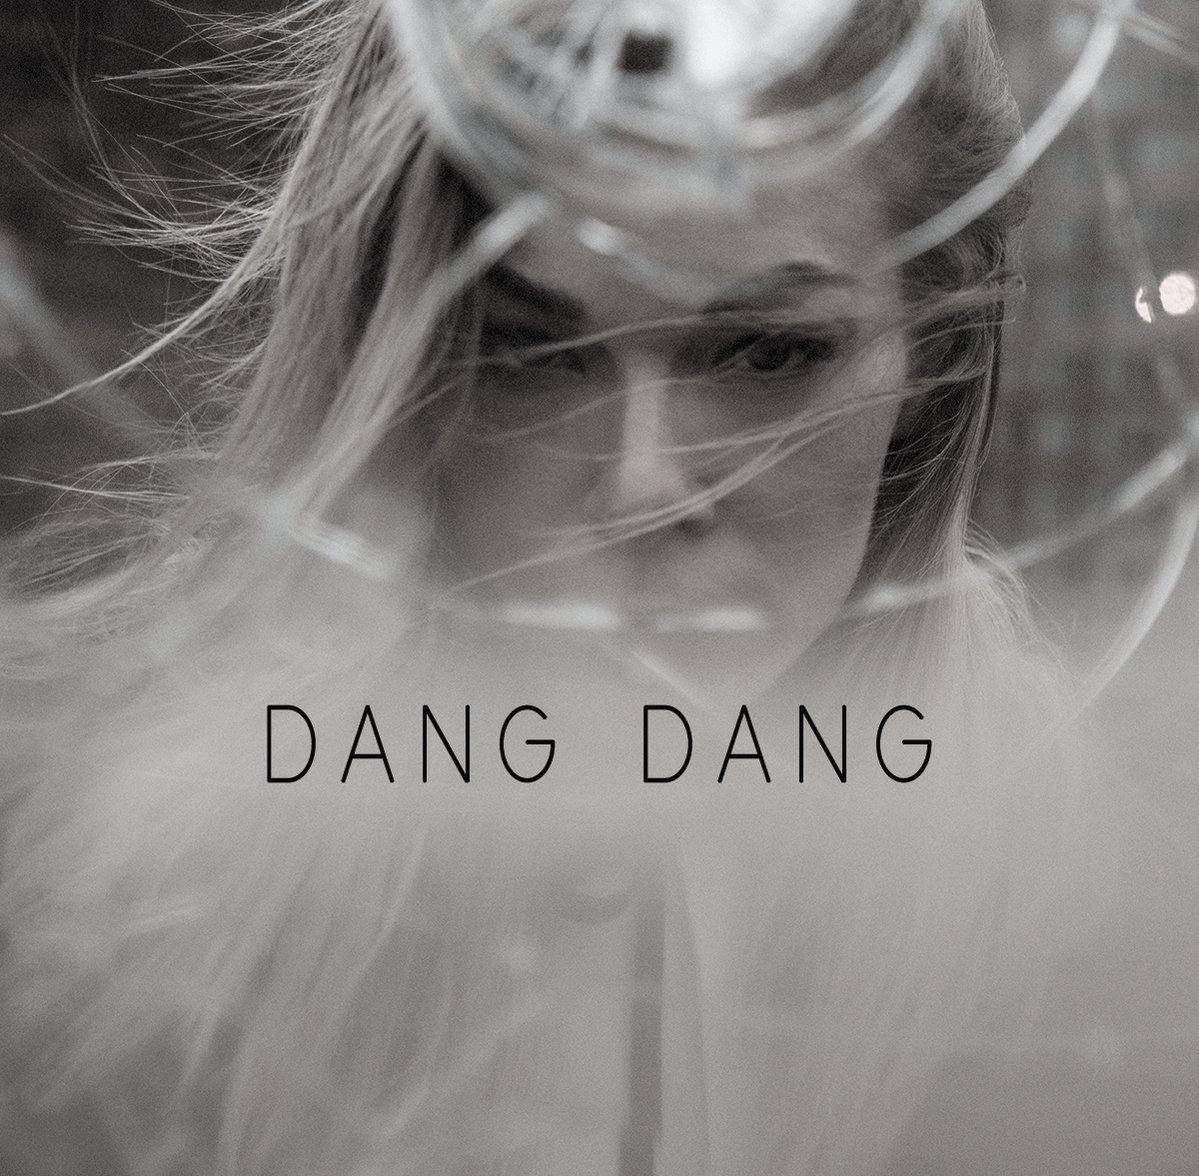 #DangDang makes me so happy! I love the groove. I love the wordplay. It's playful, it's sexy.... it's sex. #Remnants https://t.co/4LMYhbLhAN